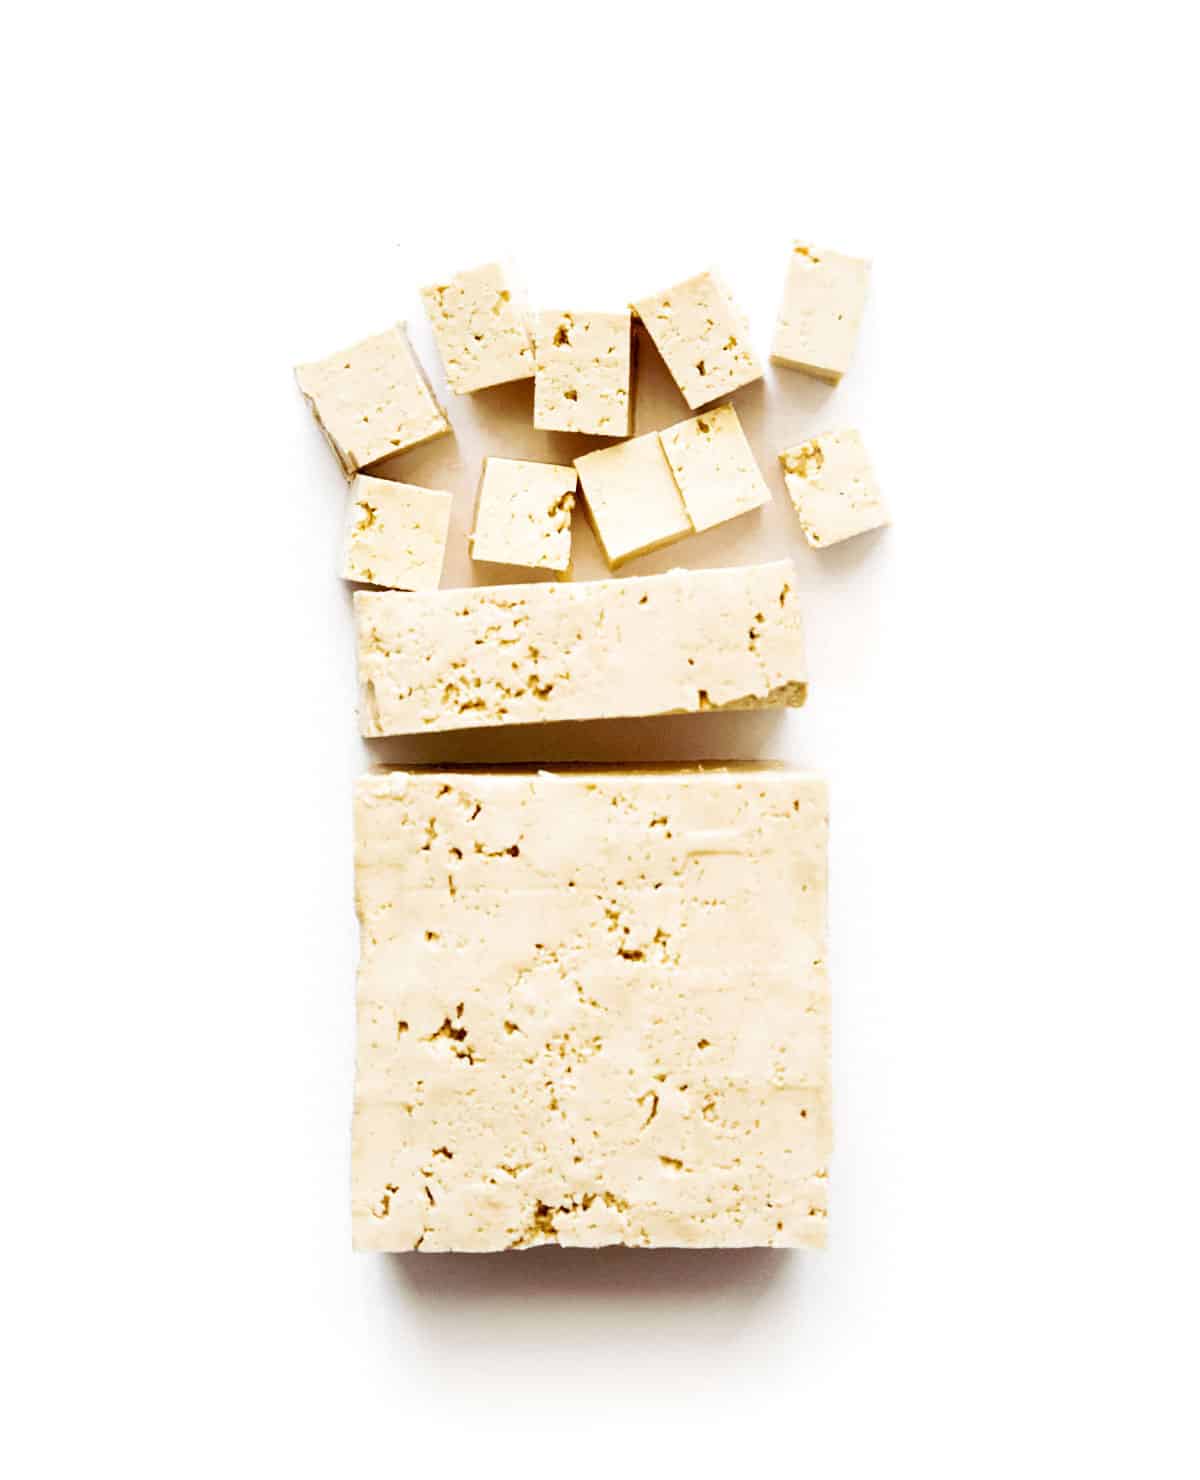 Photo of cubed tofu on a white background